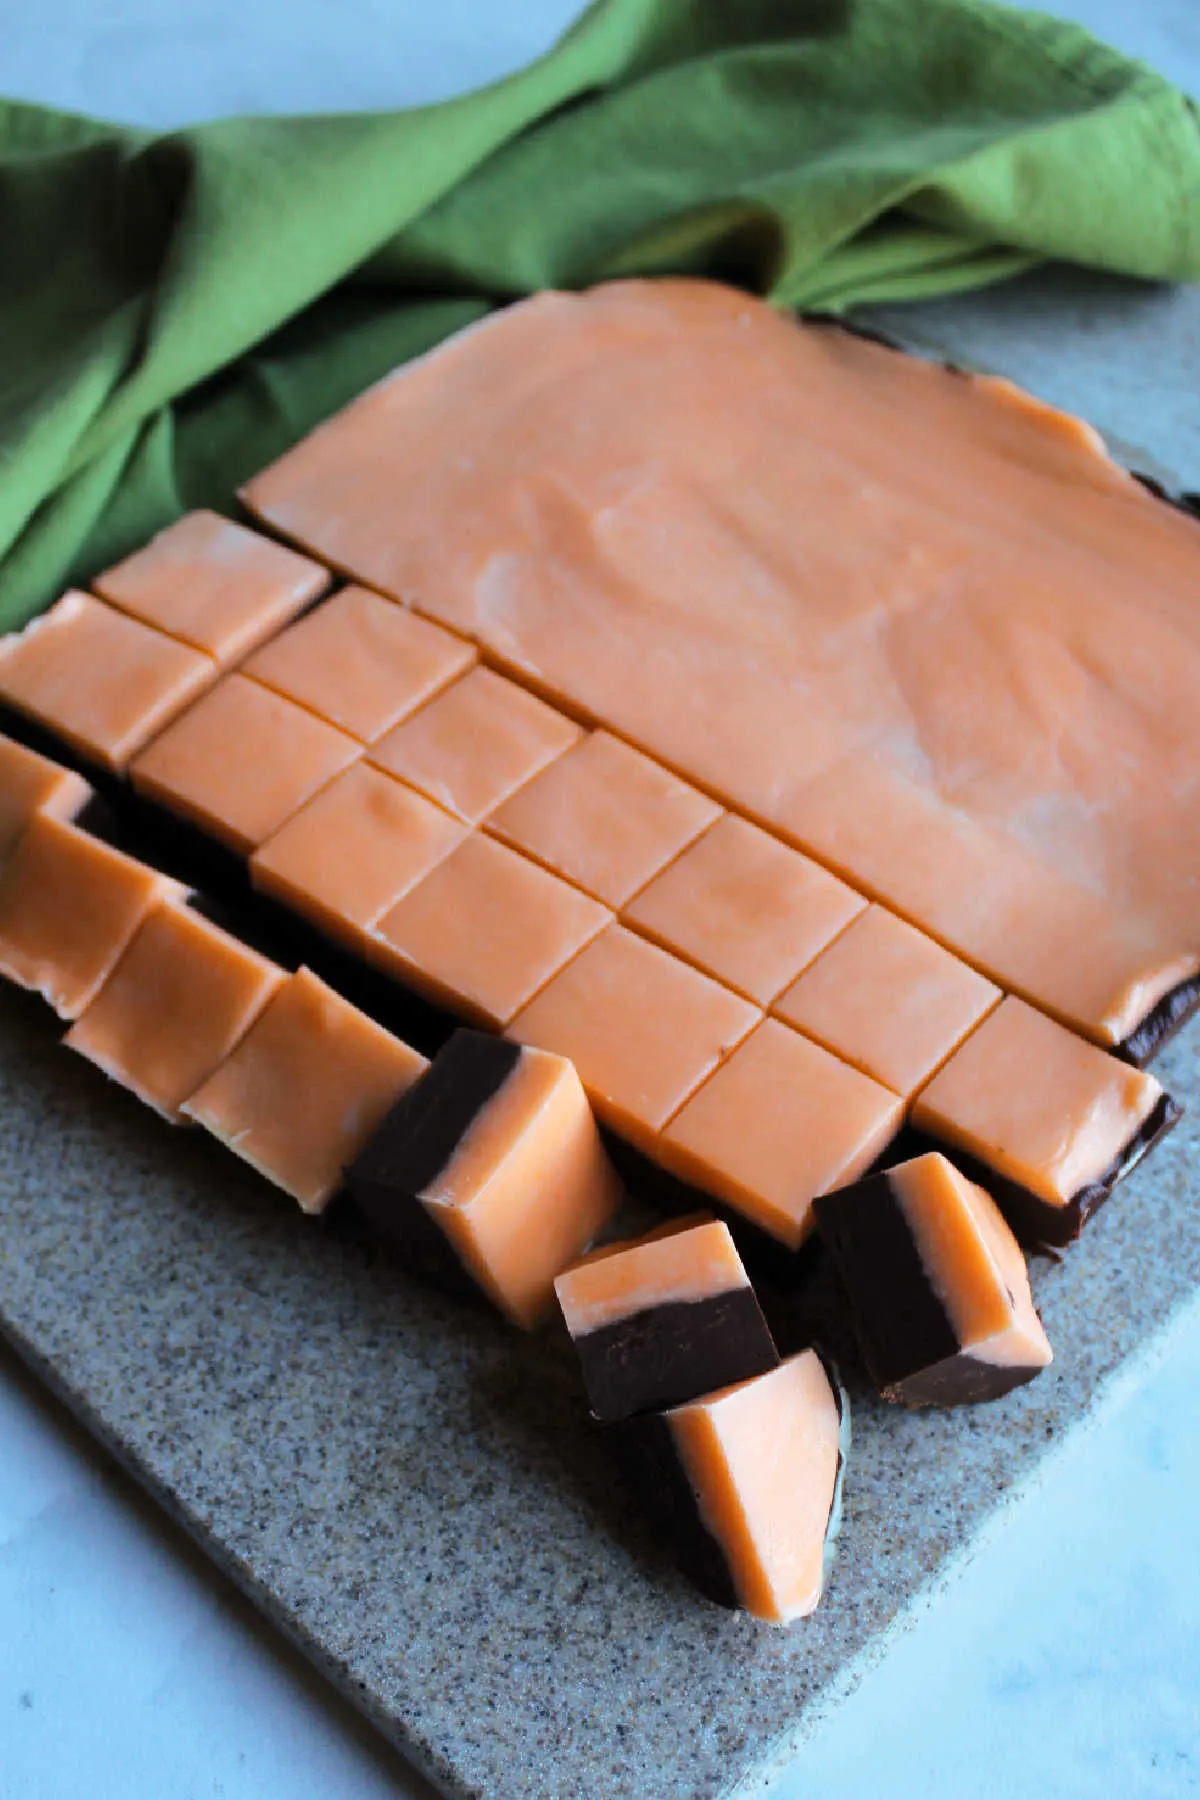 Cutting a batch of layered chocolate orange fudge into small squares.